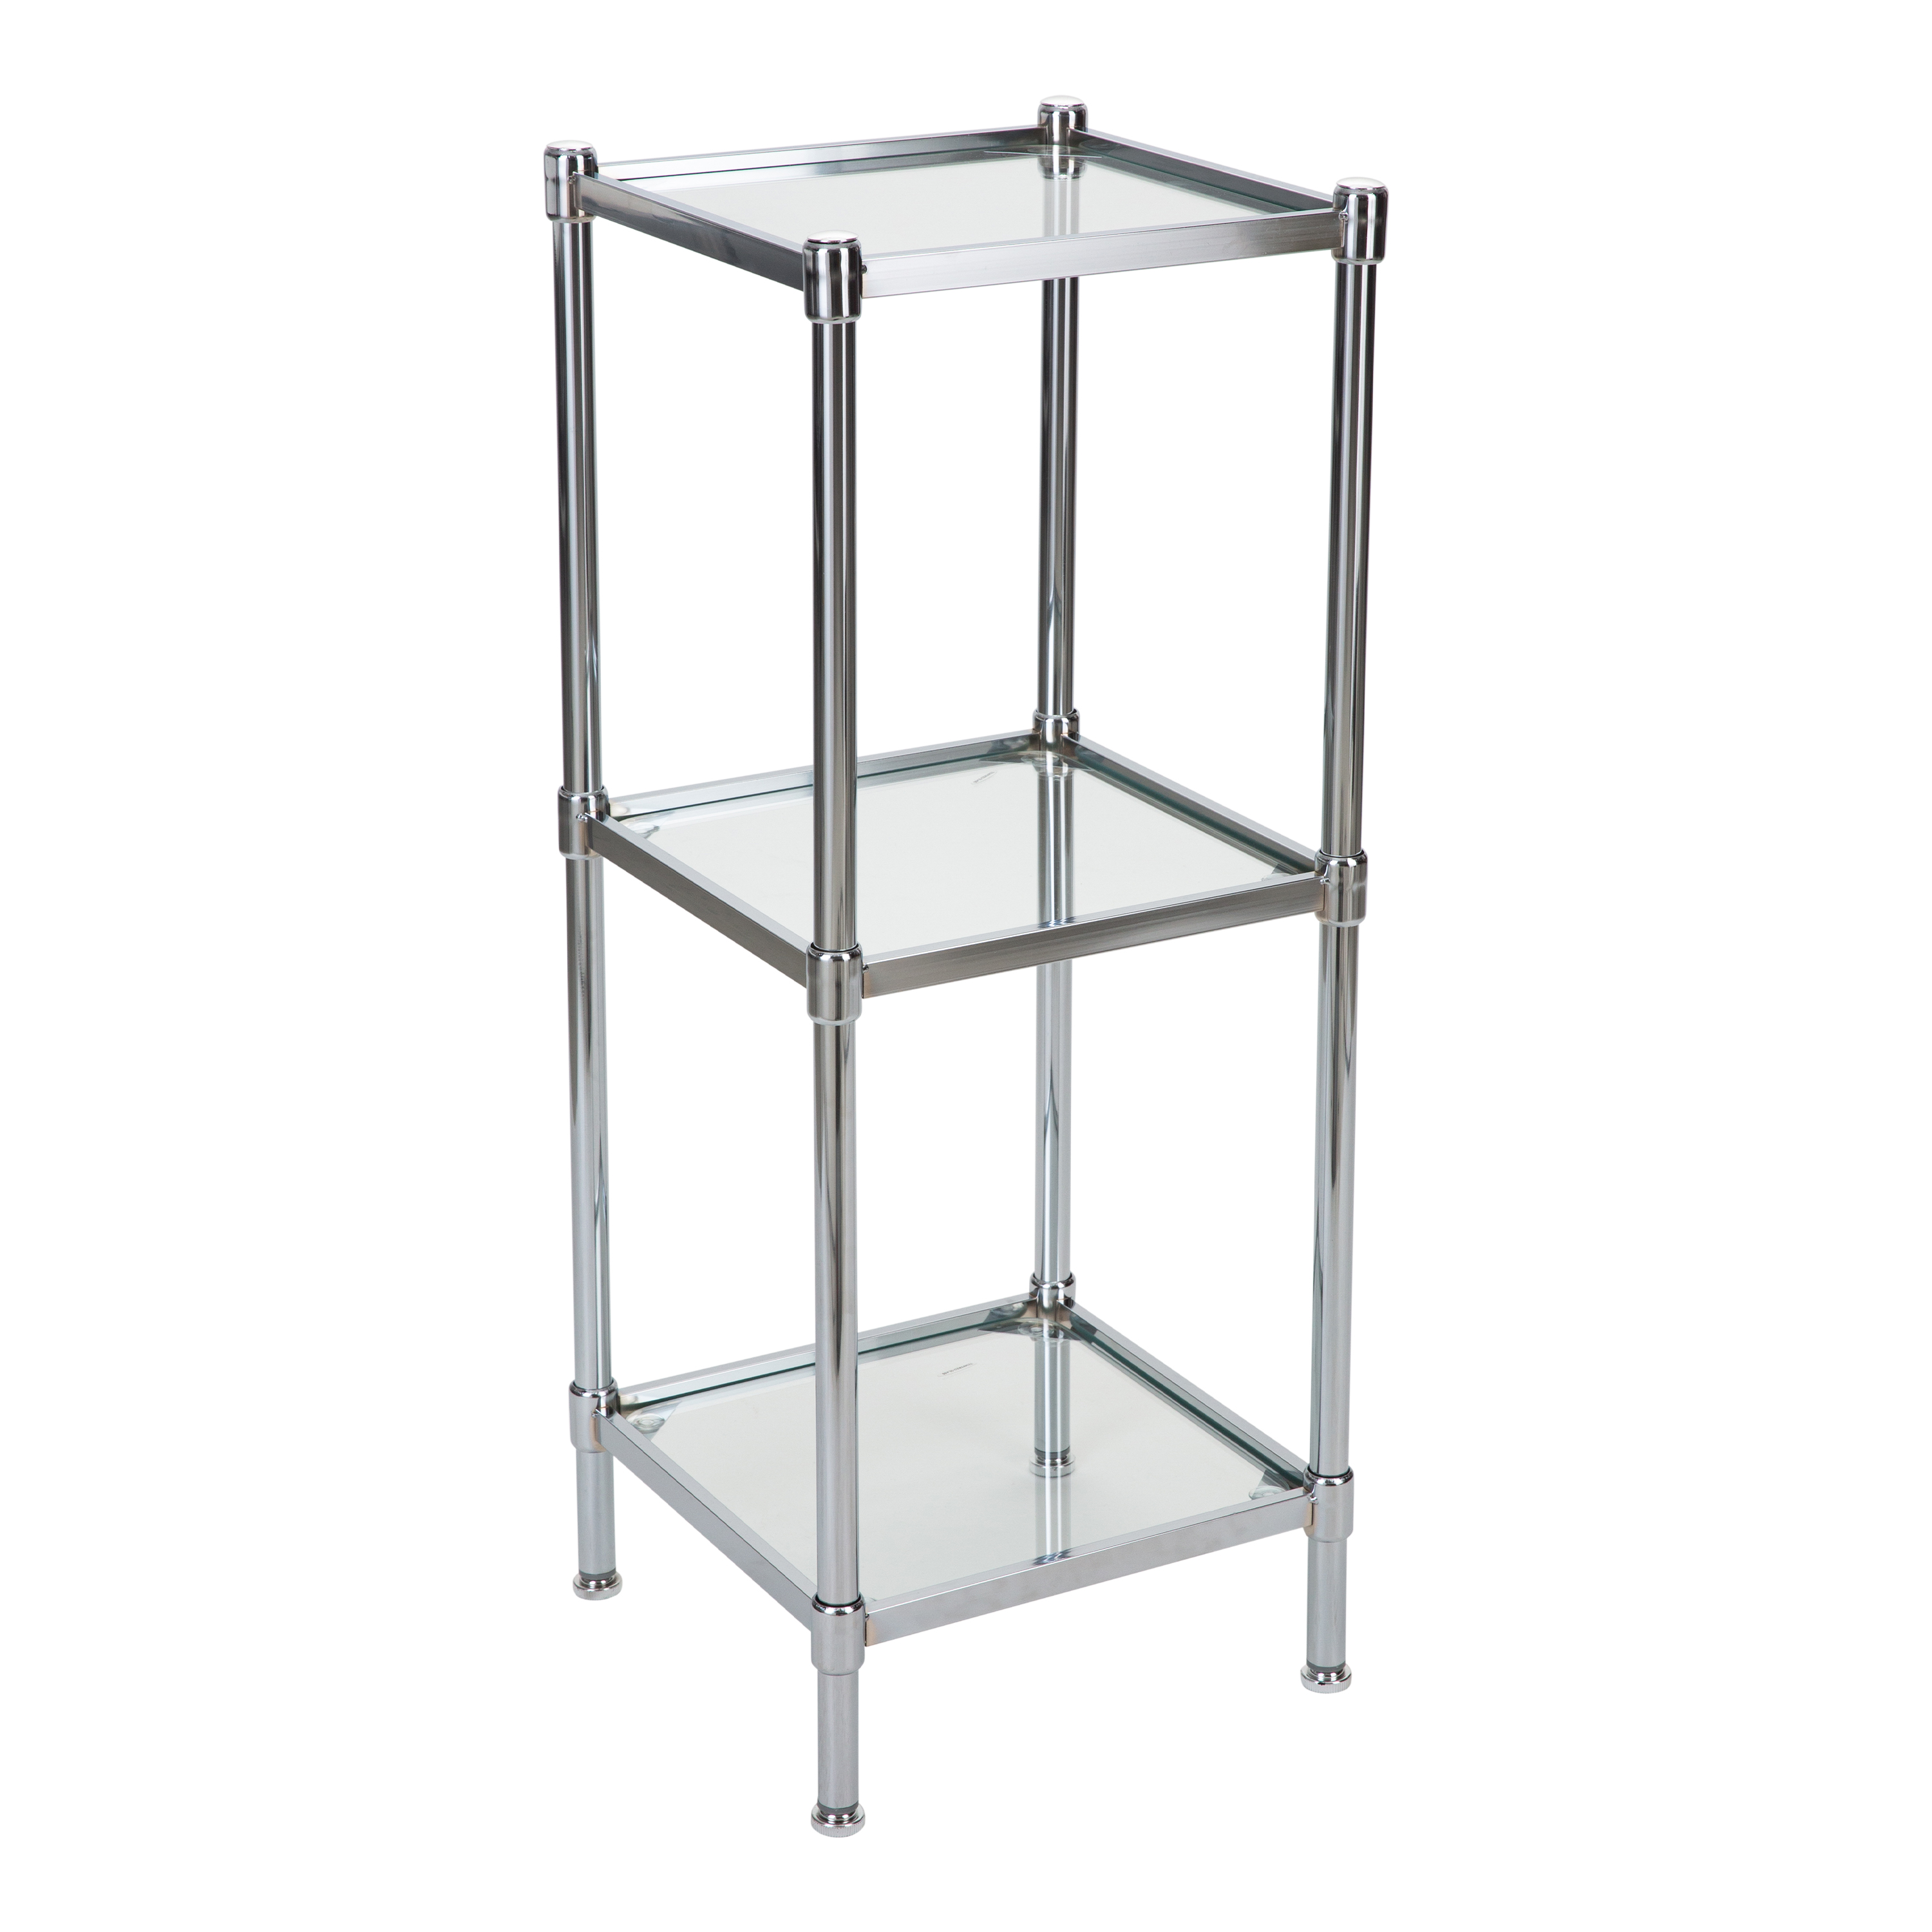 Organize It All 3 Tier Freestanding Steel Tempered Glass Shelving Tower - image 1 of 7